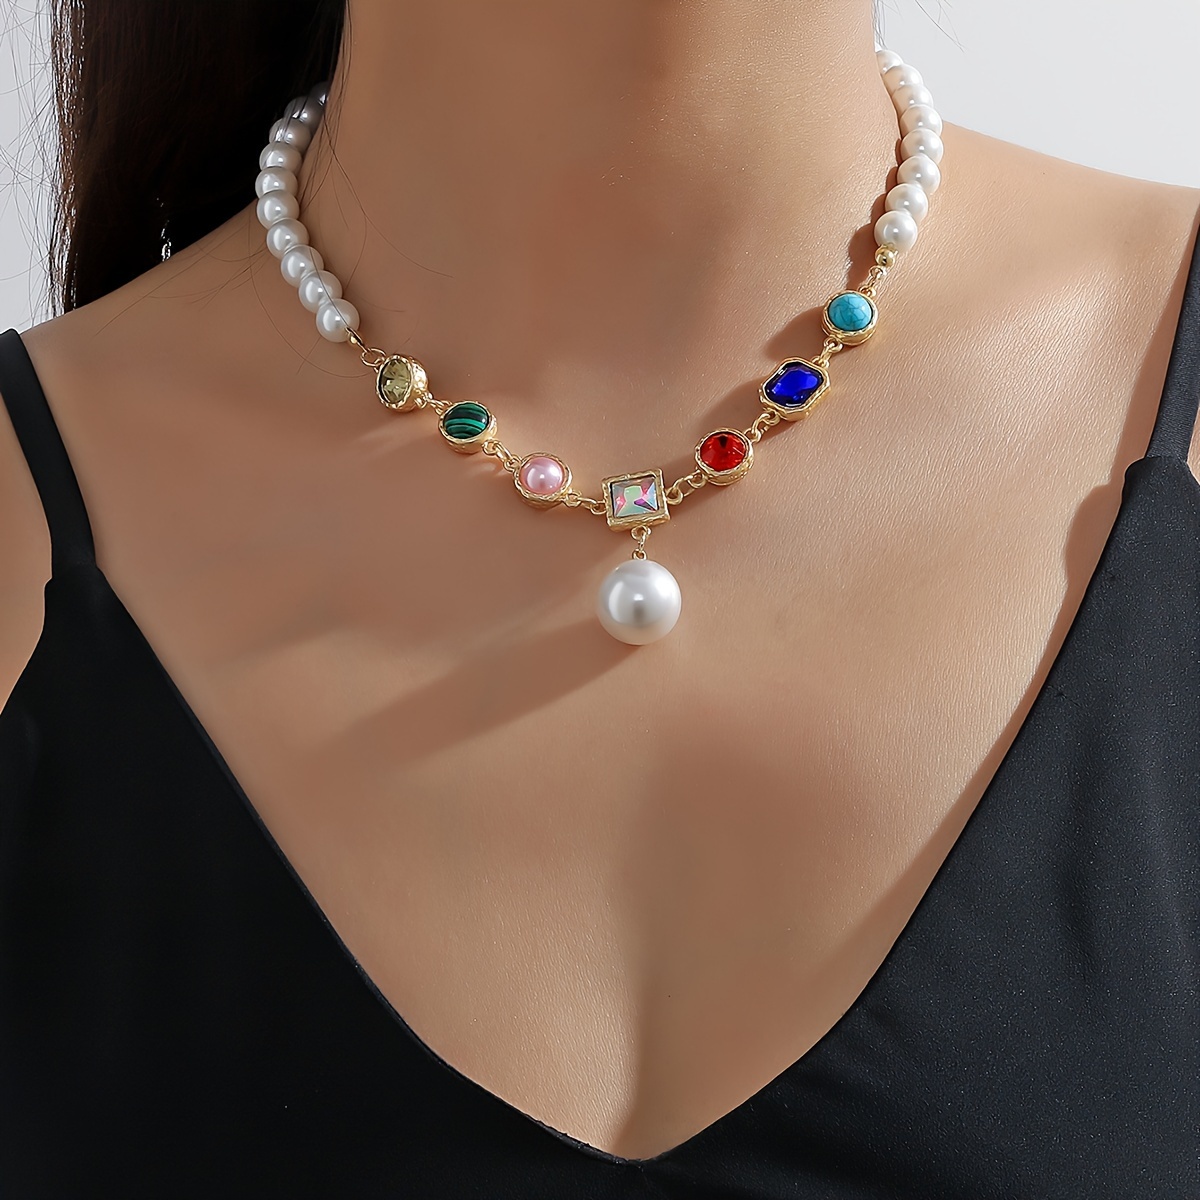 Bohemian Style Colorful Imitation Pearls Crystal Mixed Multilayer Necklace Ladies Exquisite Handmade Necklace Gift (Color Beads Random Arranged